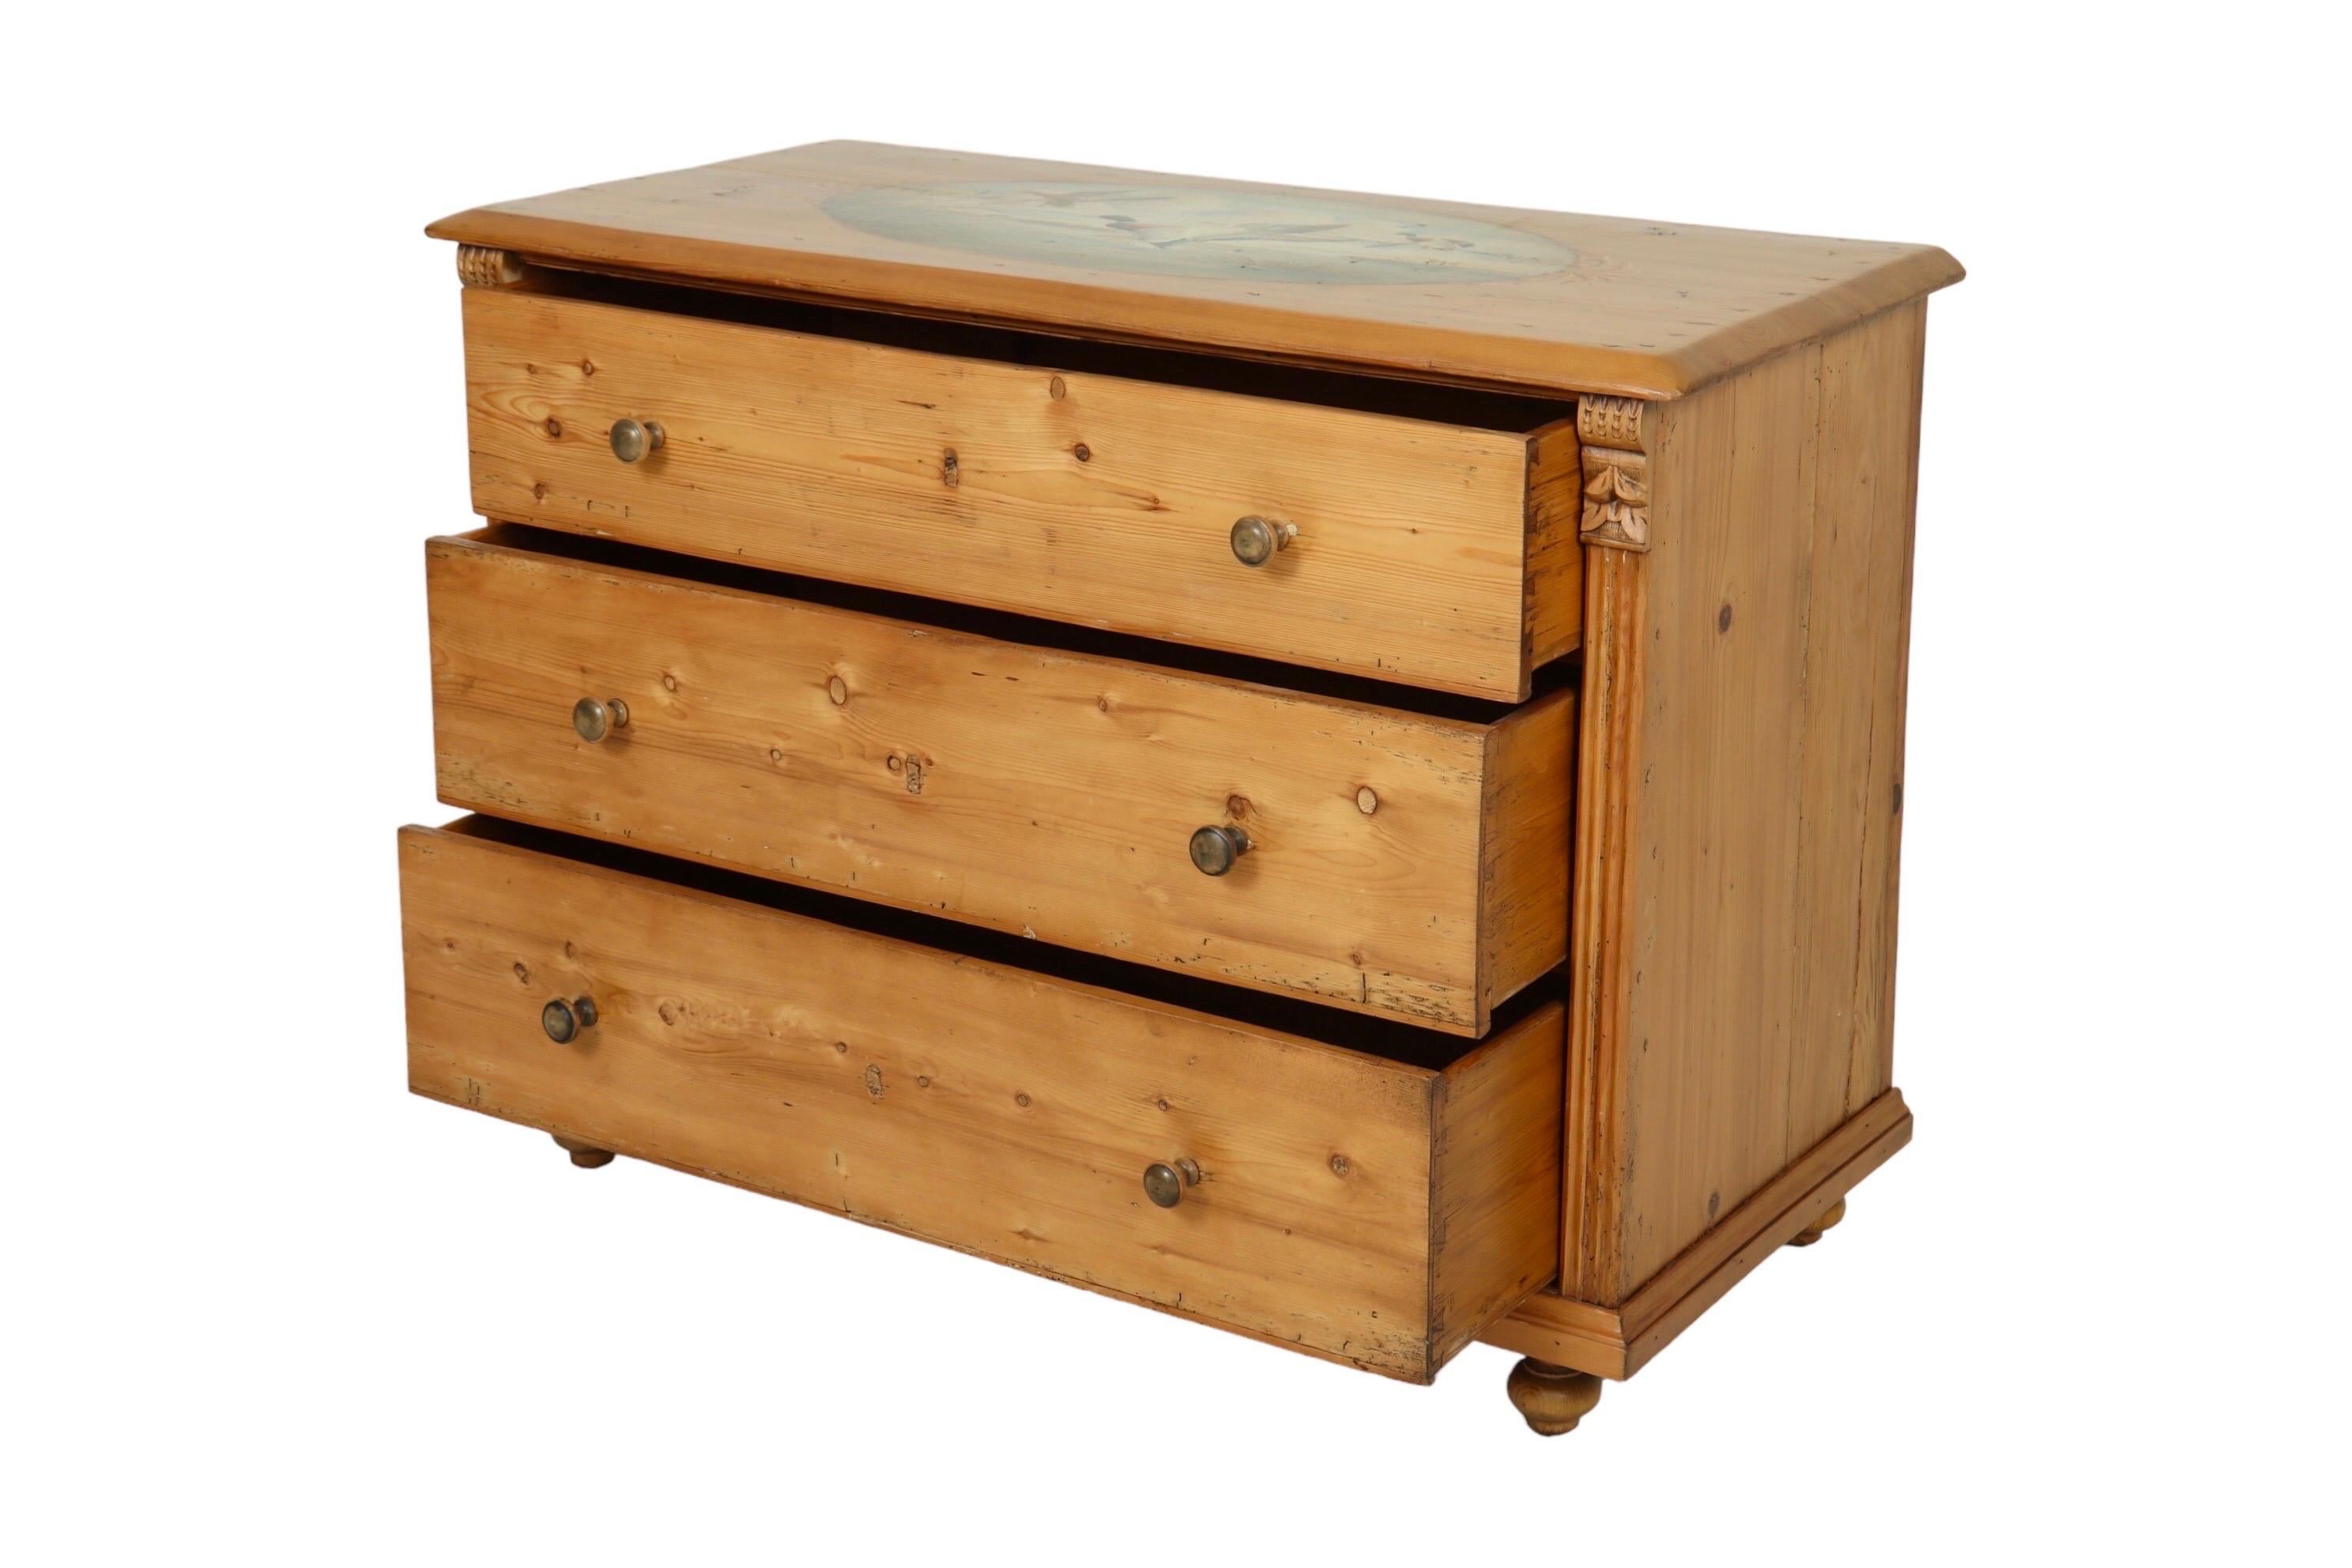 A colonial style dresser made of knotty pine. The dresser is hand painted on top with an idyllic oval scene of four mallard ducks landing on a lake with cattails beneath a fair weather sky. Fluted columns at each side, topped with simply carved